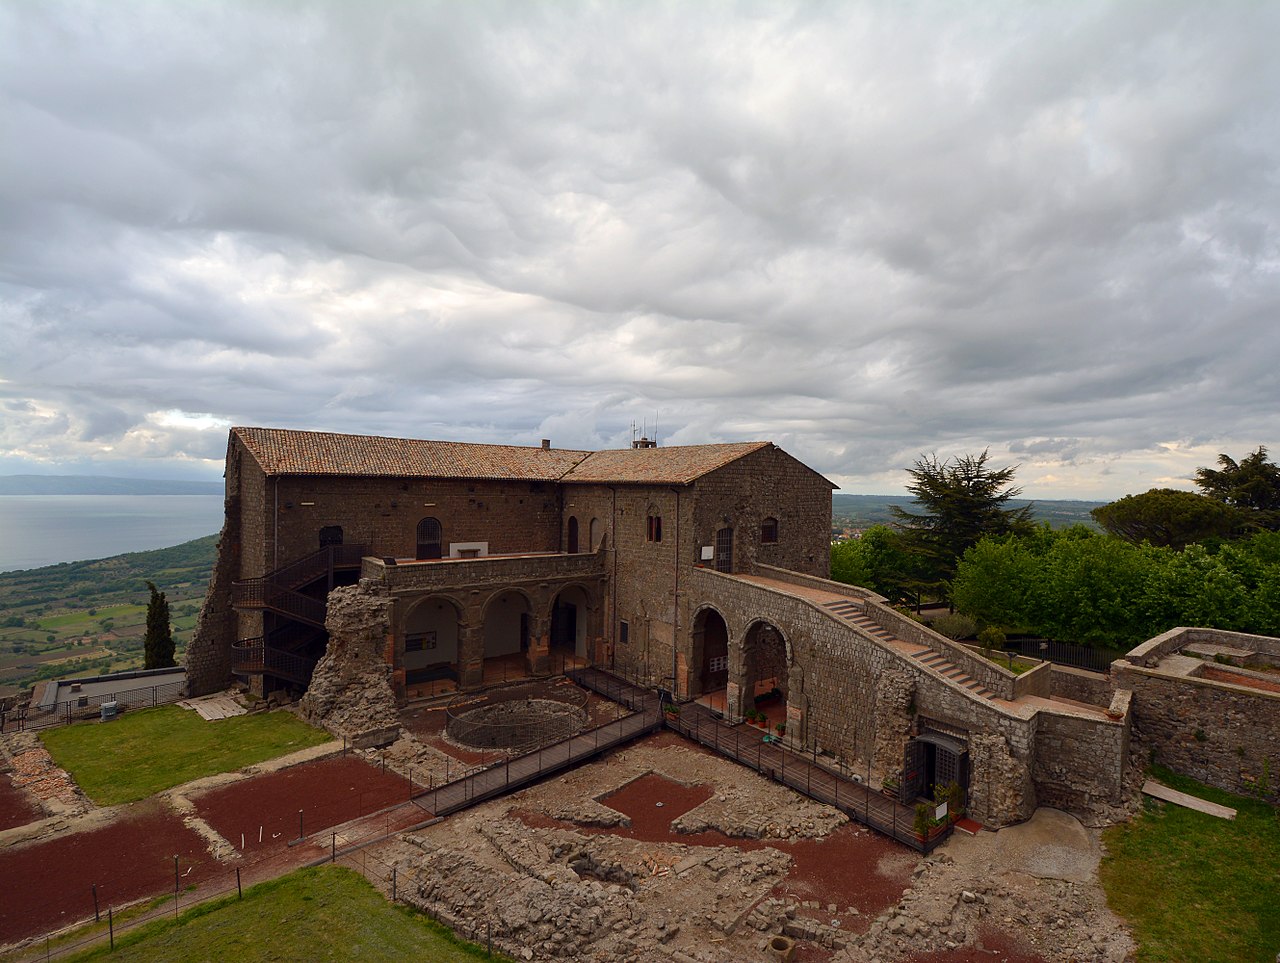 The Fortress of the Popes of Montefiascone